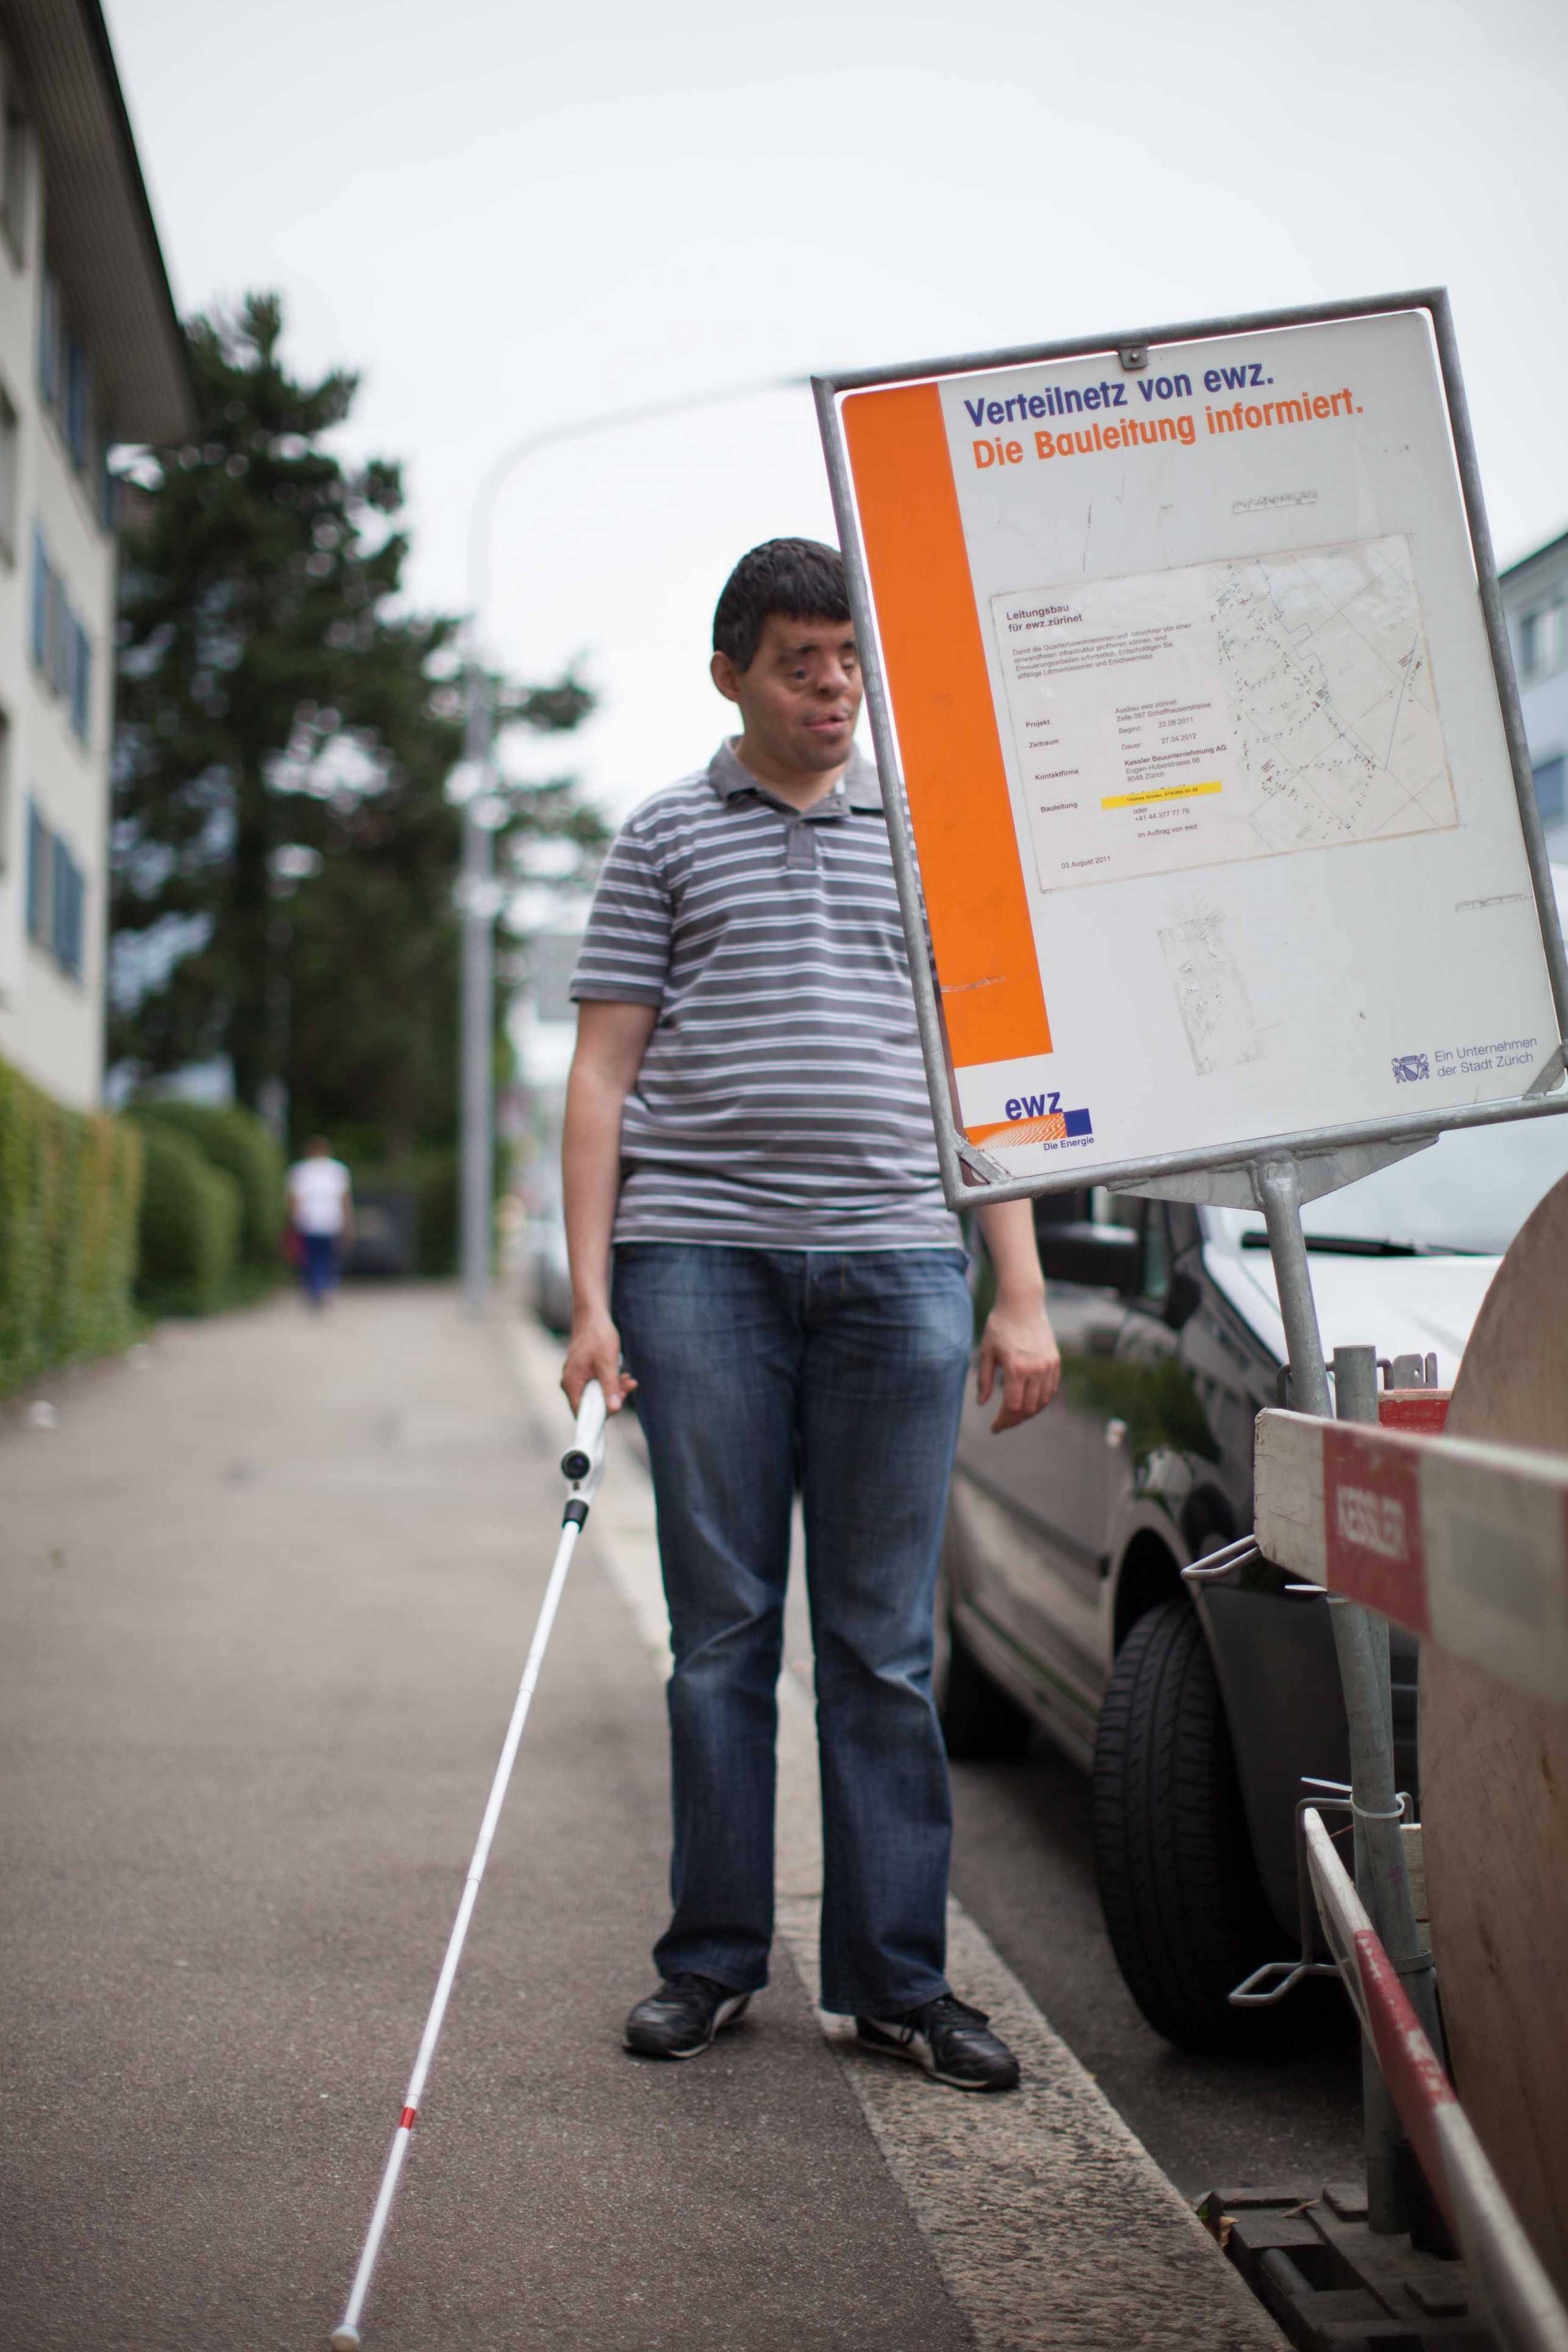 Enlarged view: A blind person walks towards an obstacle at head height